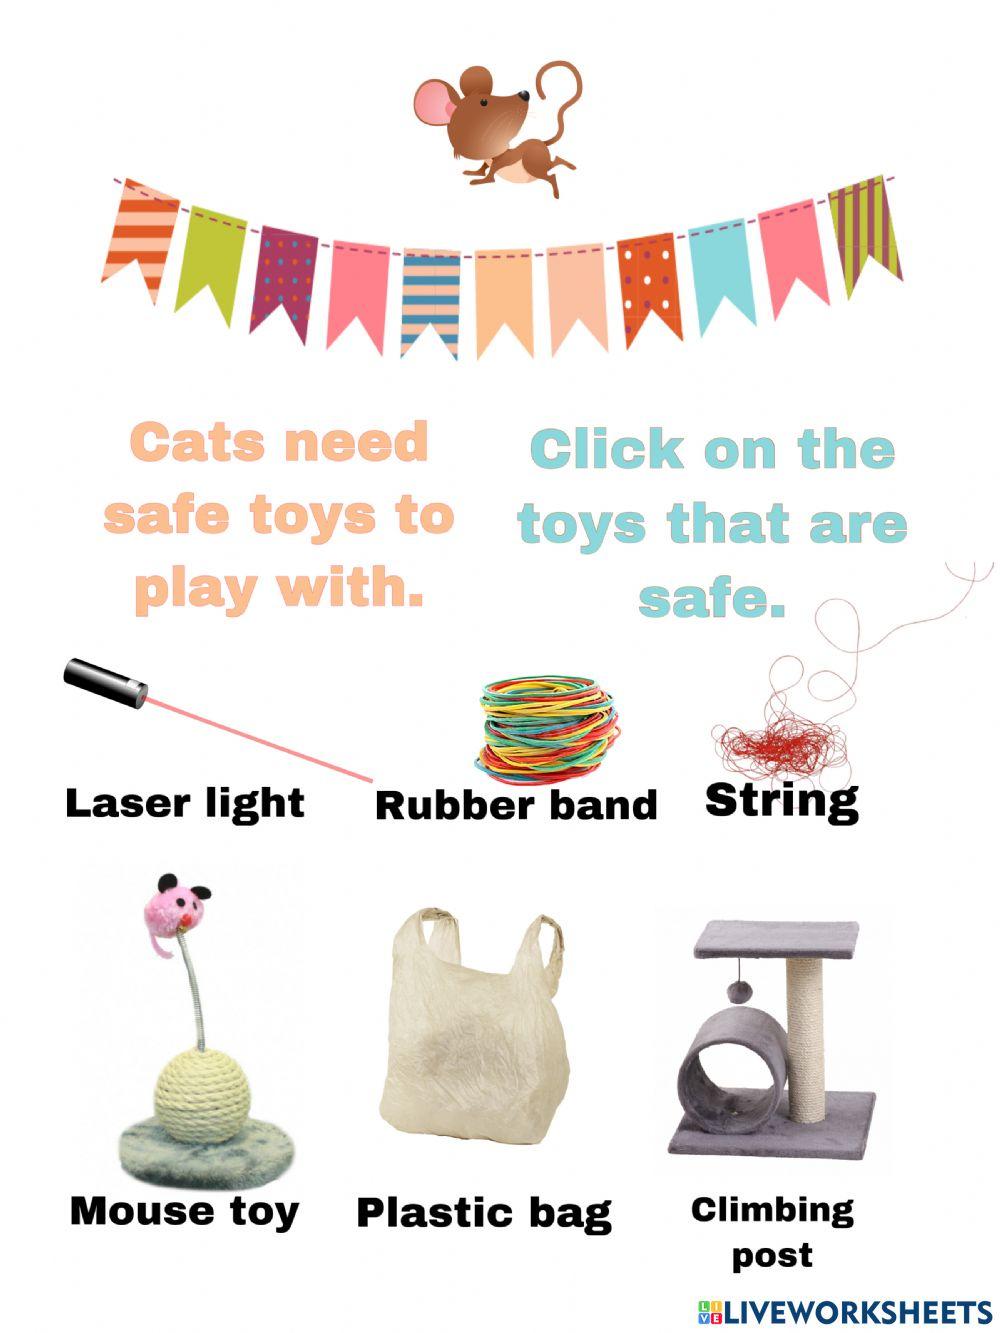 Select the toys that are safe for cats